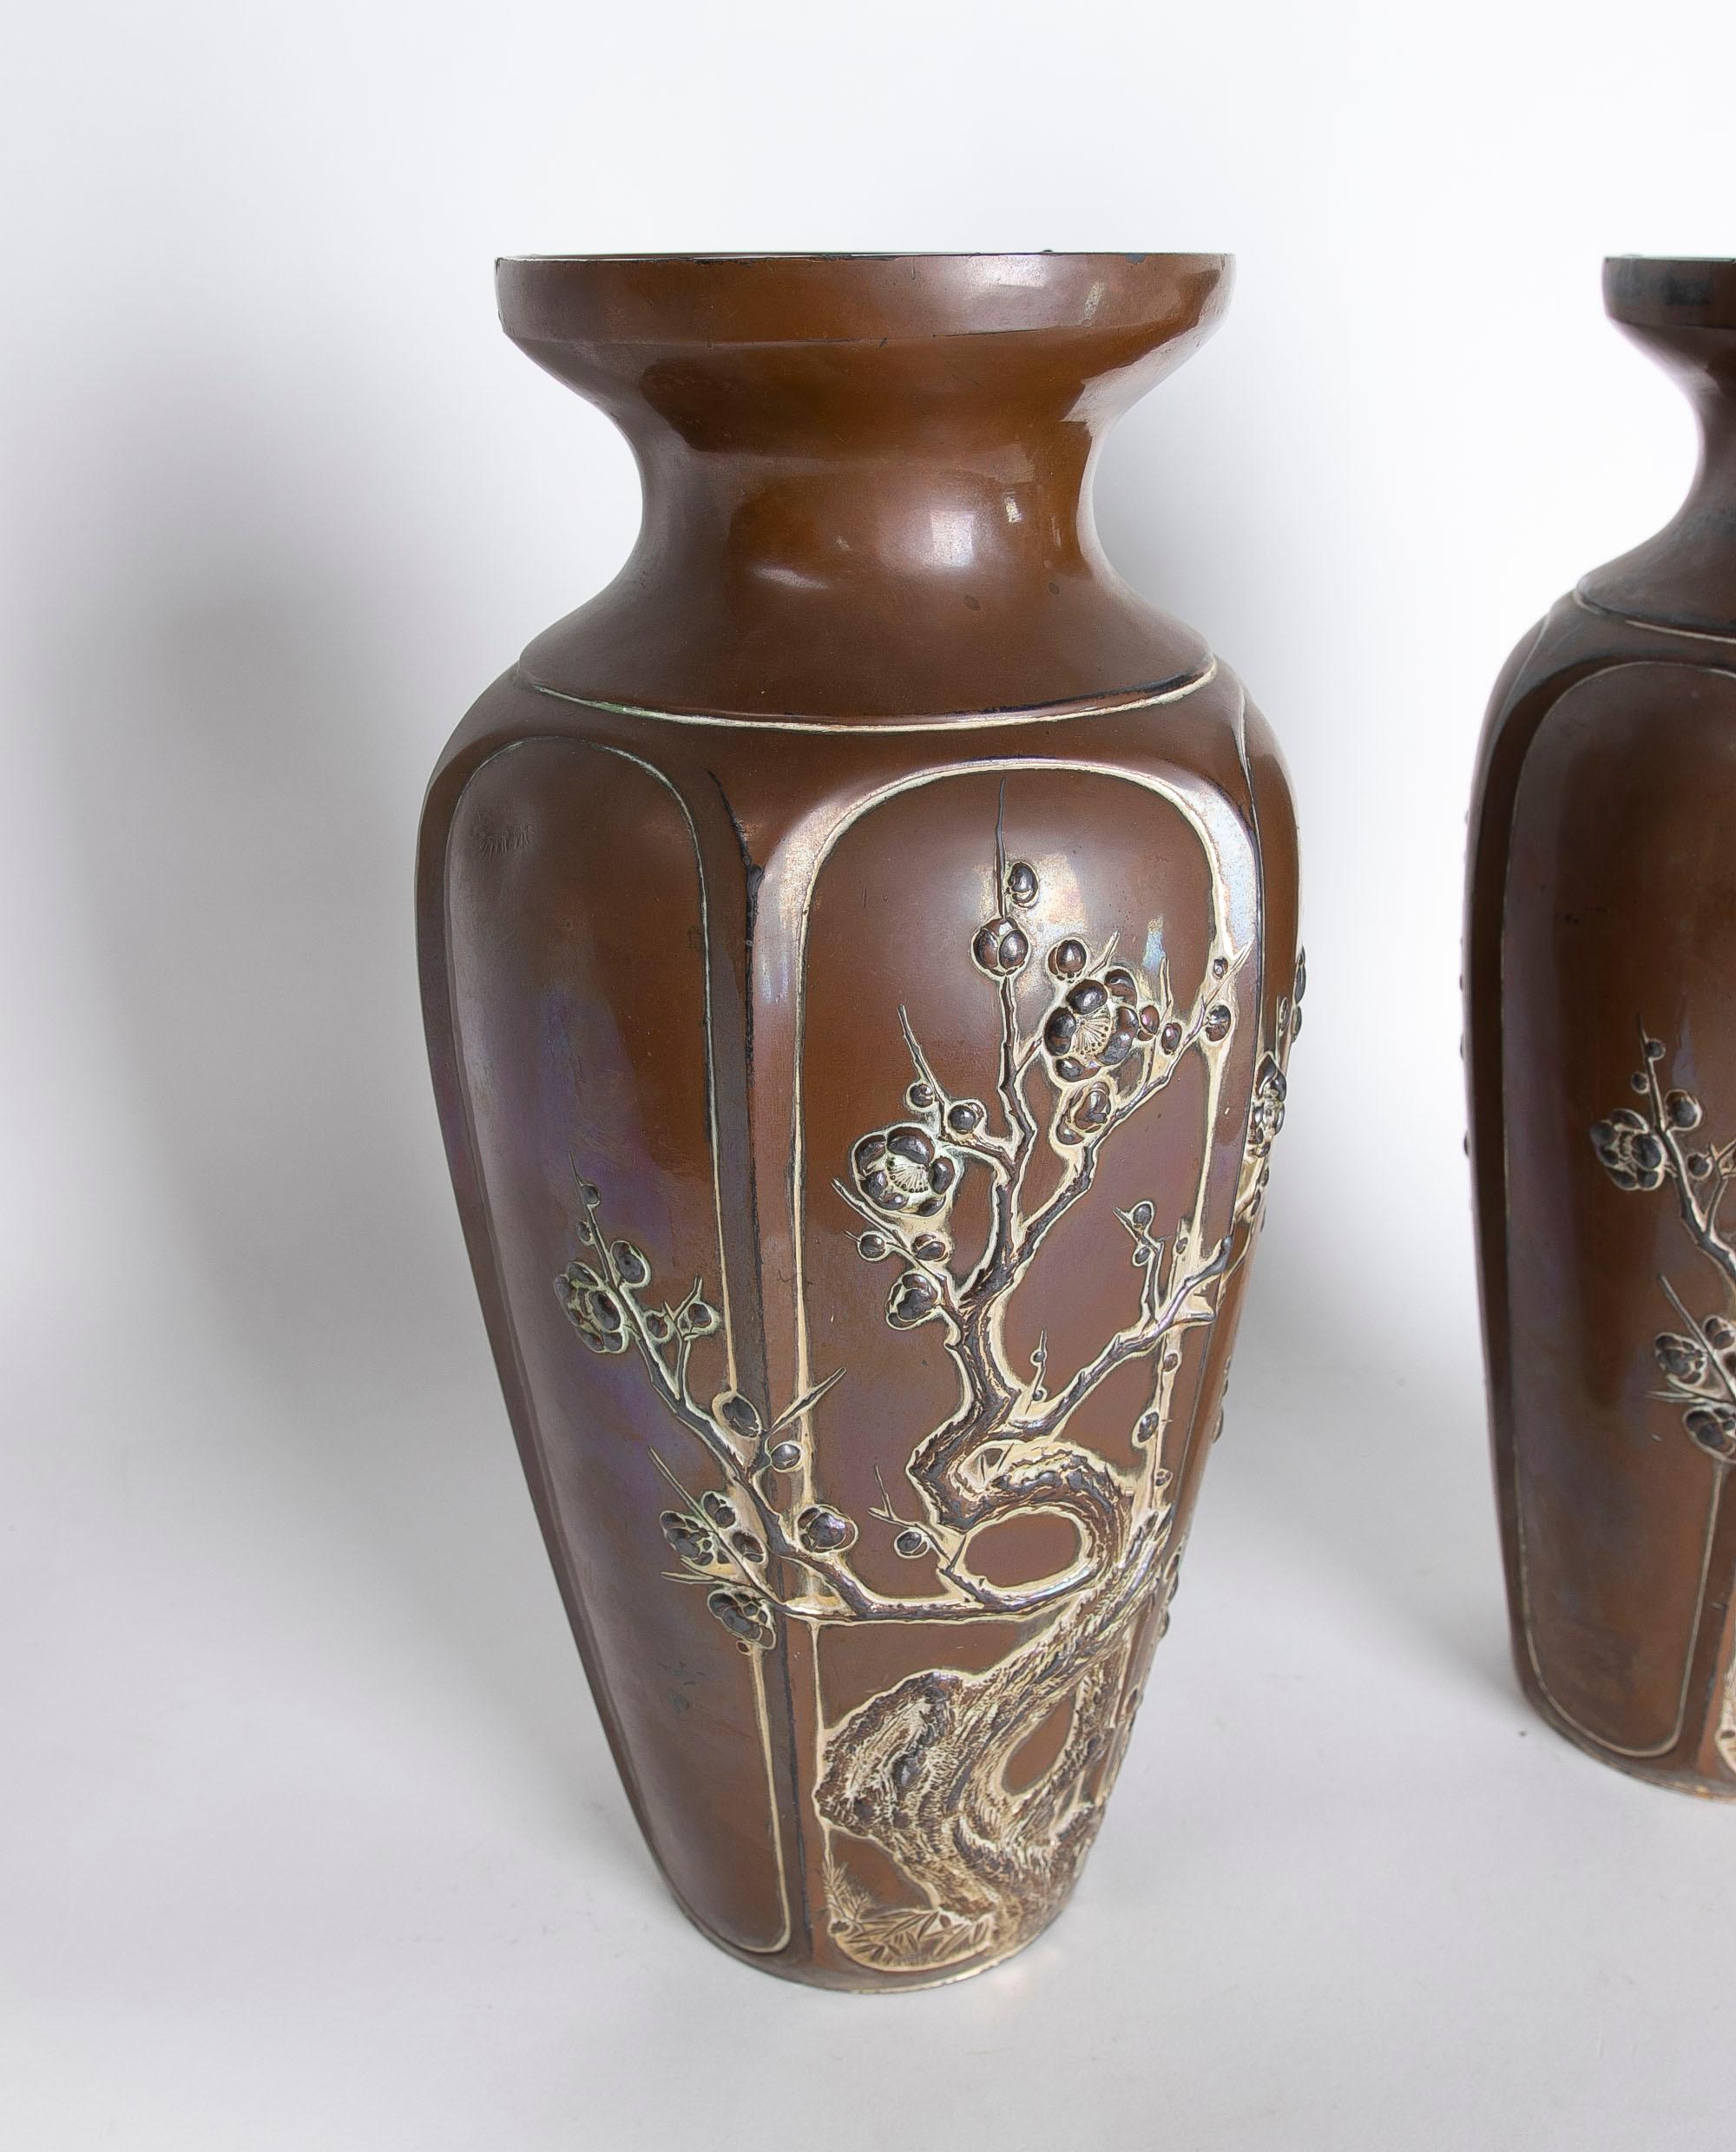 20th Century Chinese Pair of Ceramic Vases with Plants Decoration in Brown Tones For Sale